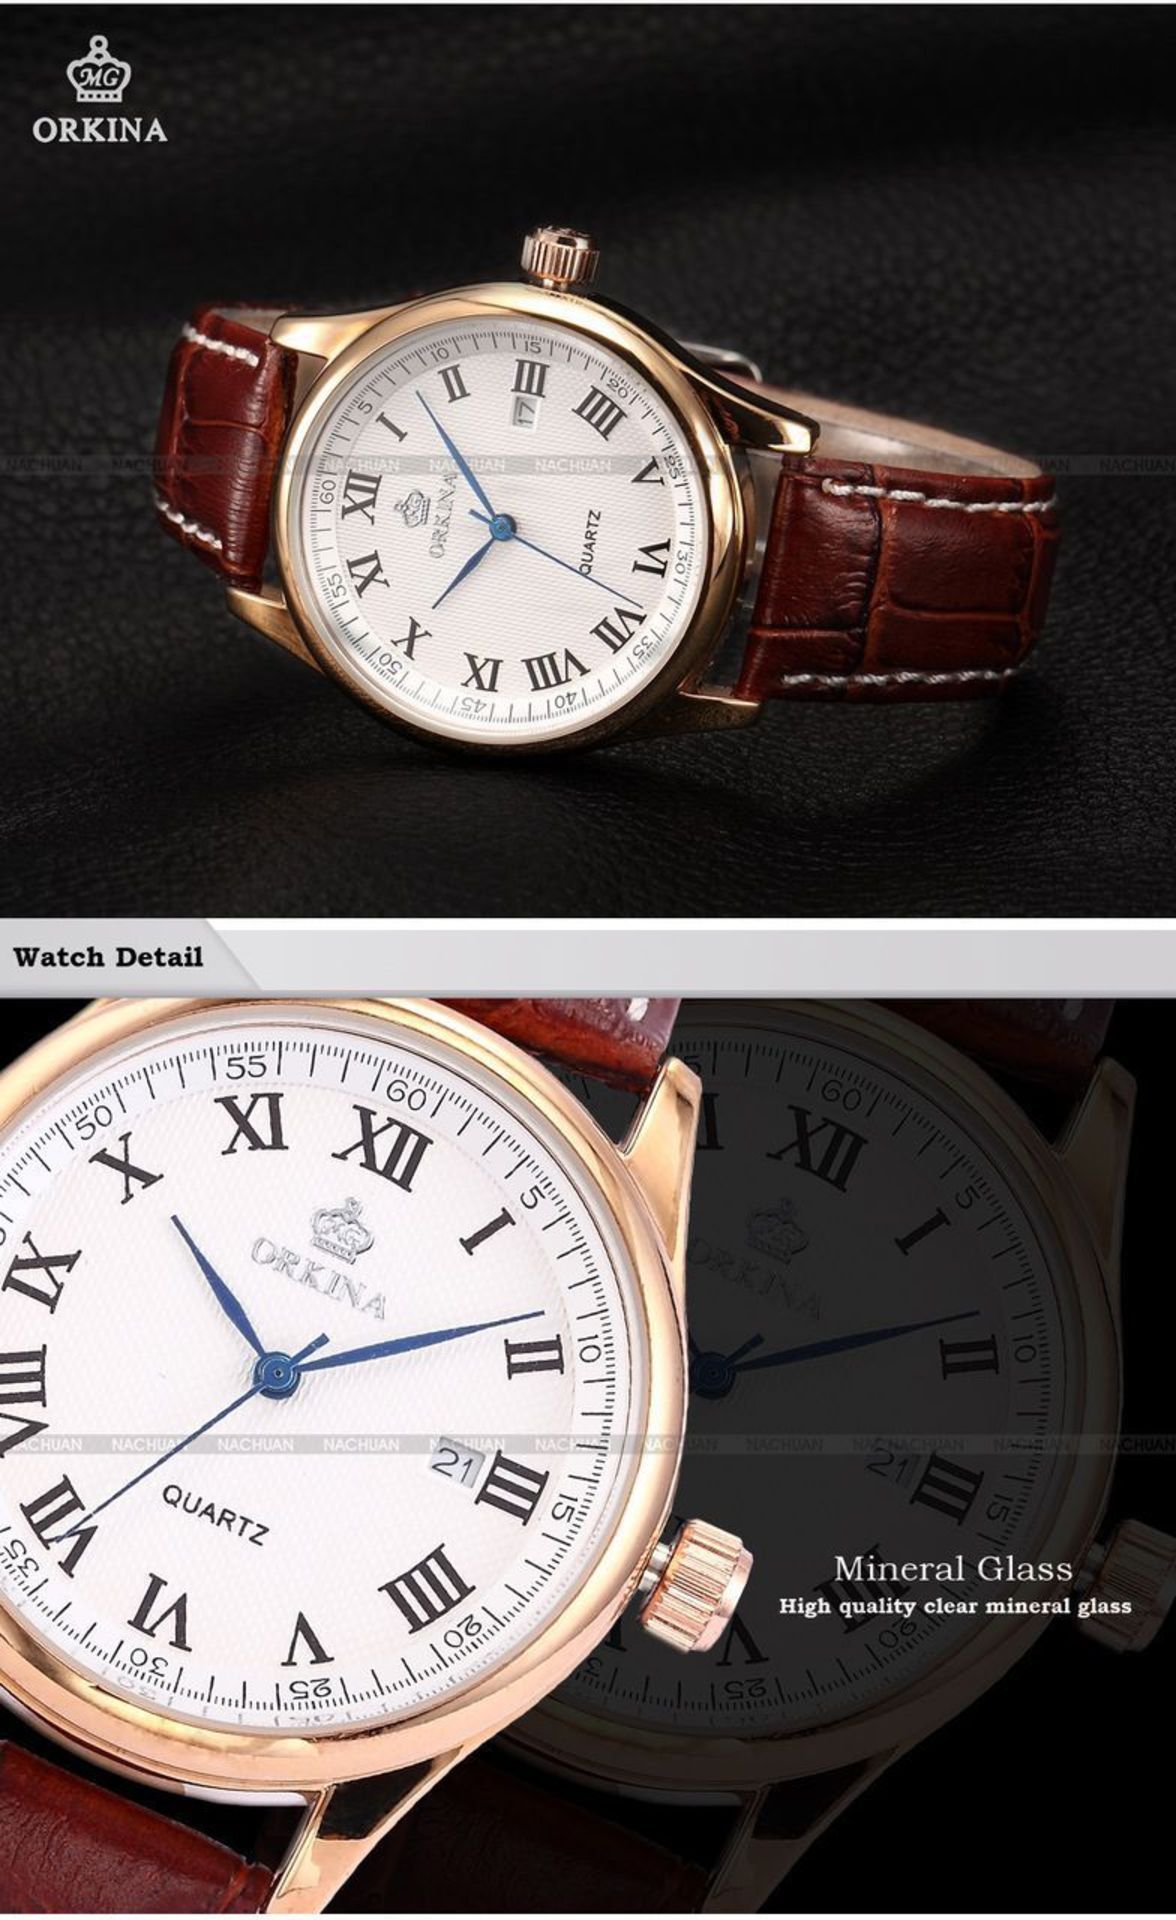 MENS ORKINA LUXURY WATCH WITH A GENUINE LEATHER STRAP *NO VAT* - Image 4 of 6